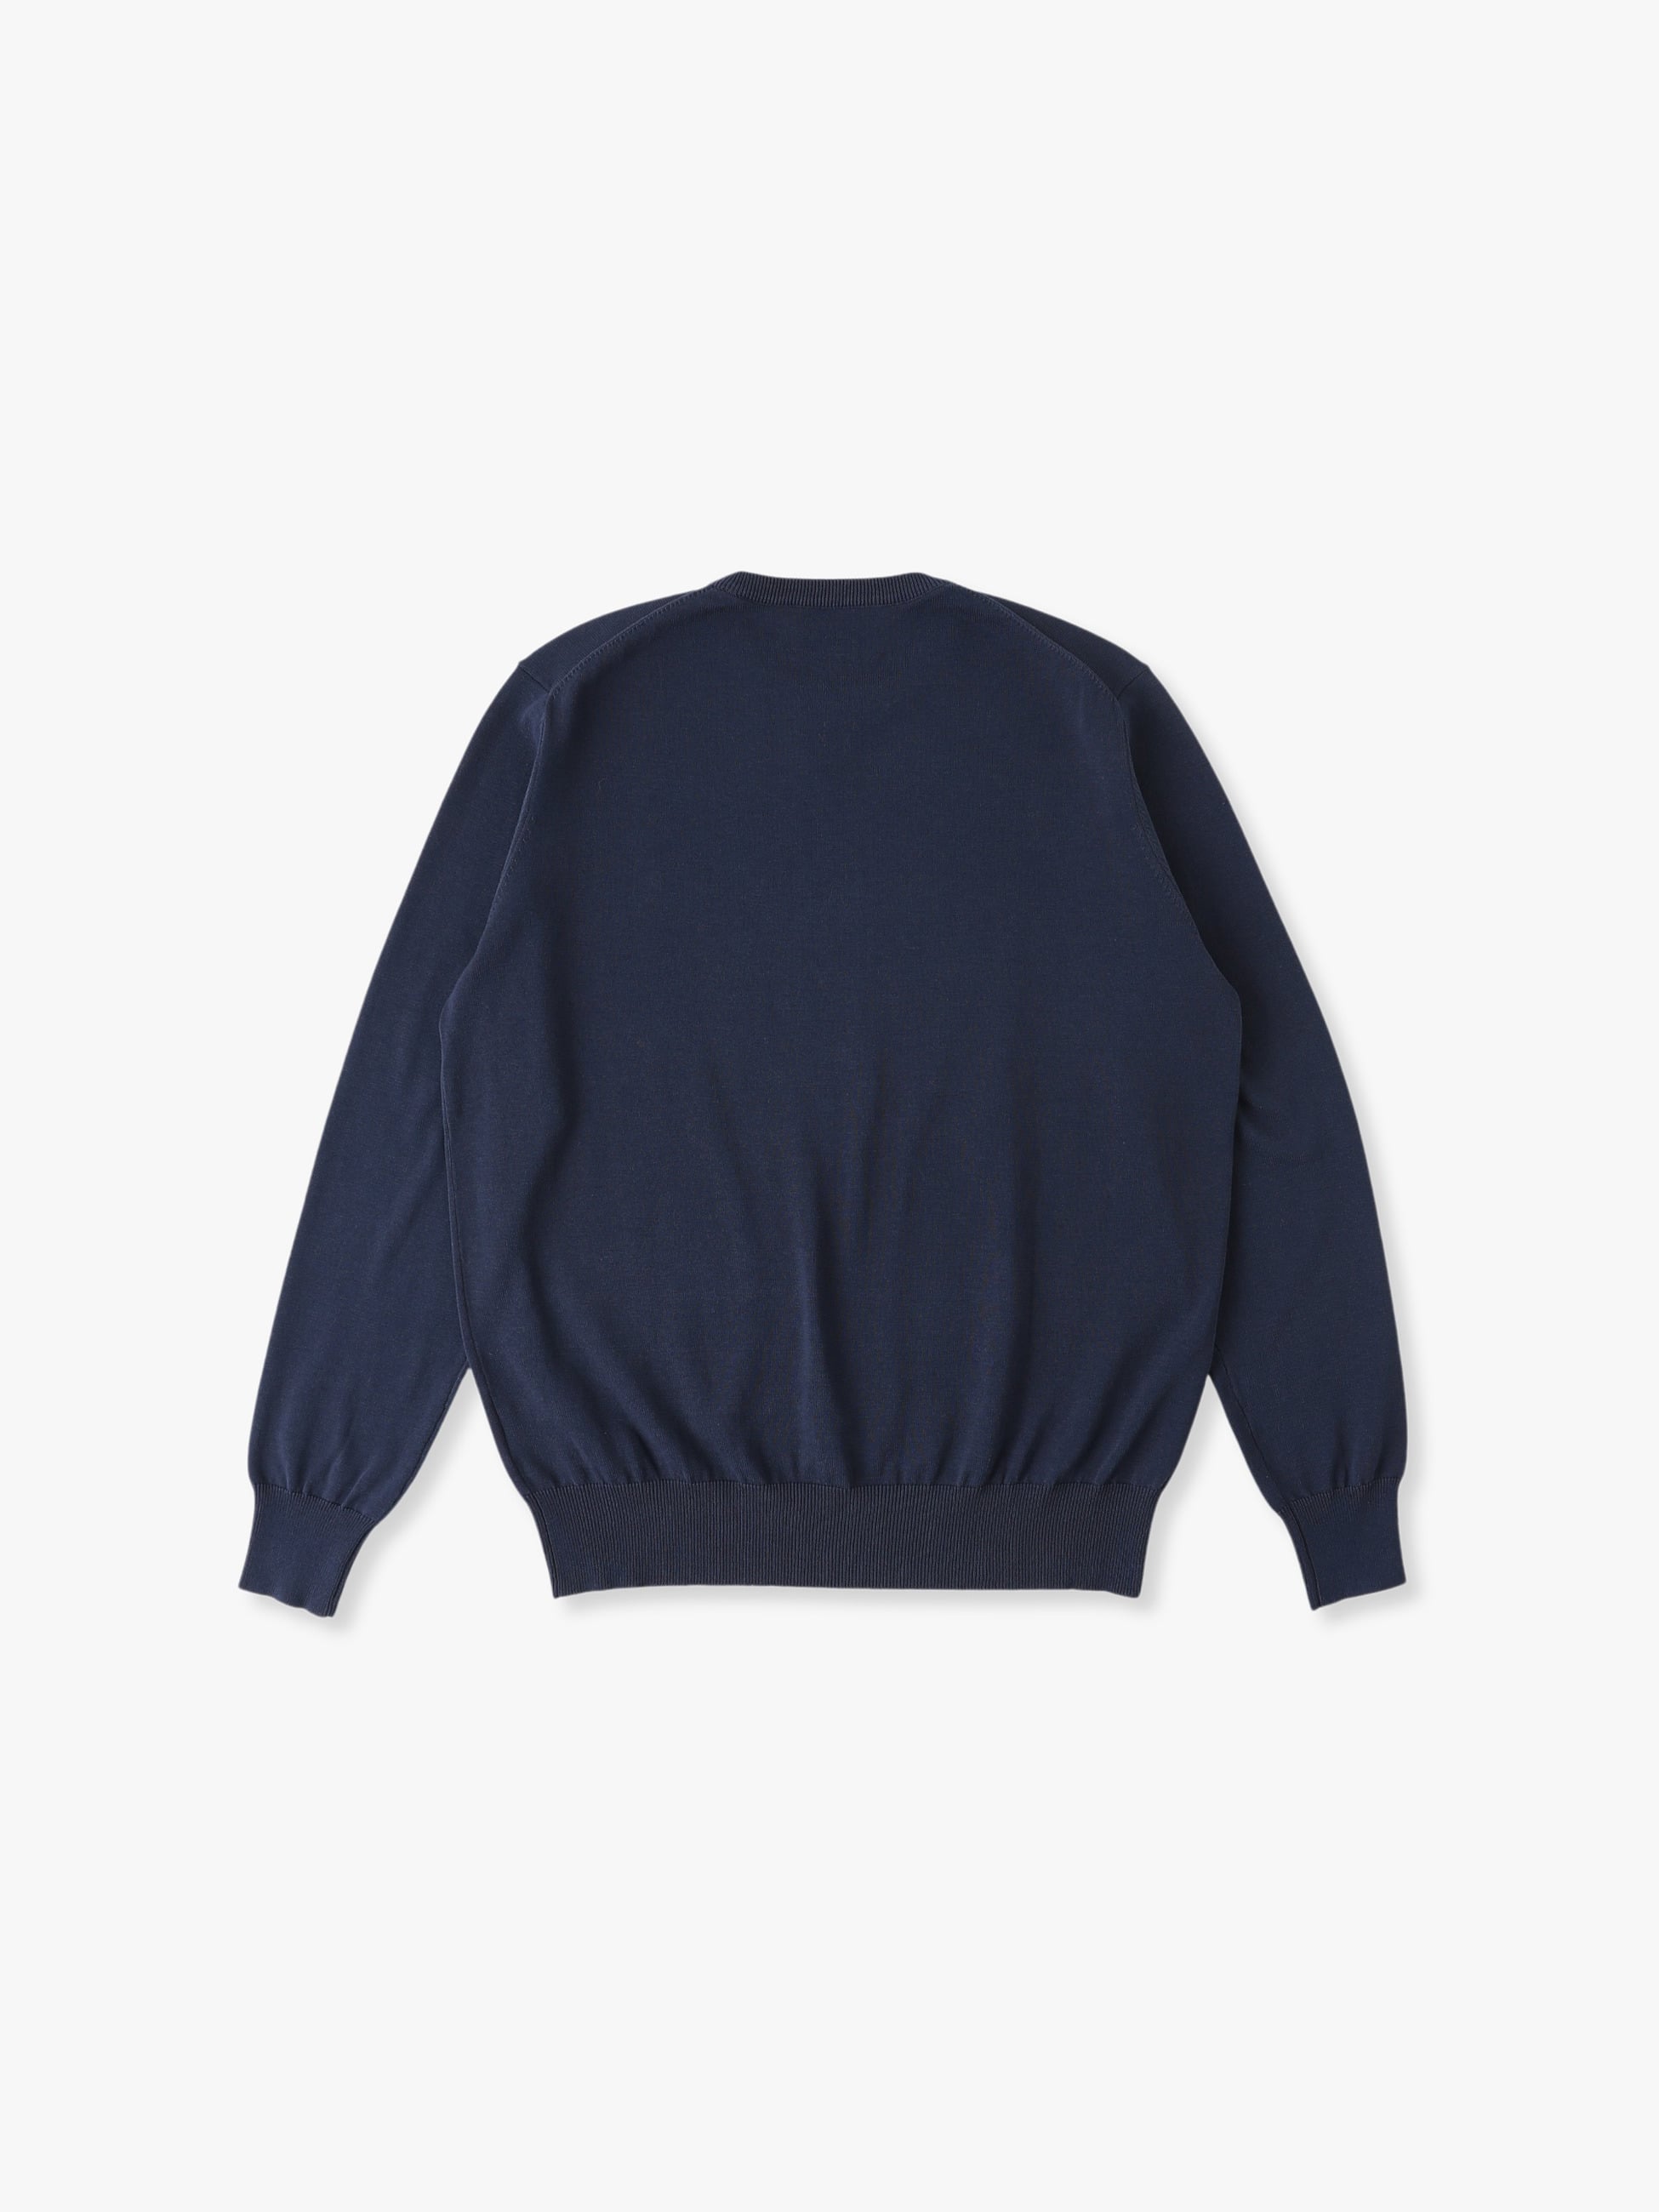 High Twisted Cotton Knit Pullover 詳細画像 navy 1